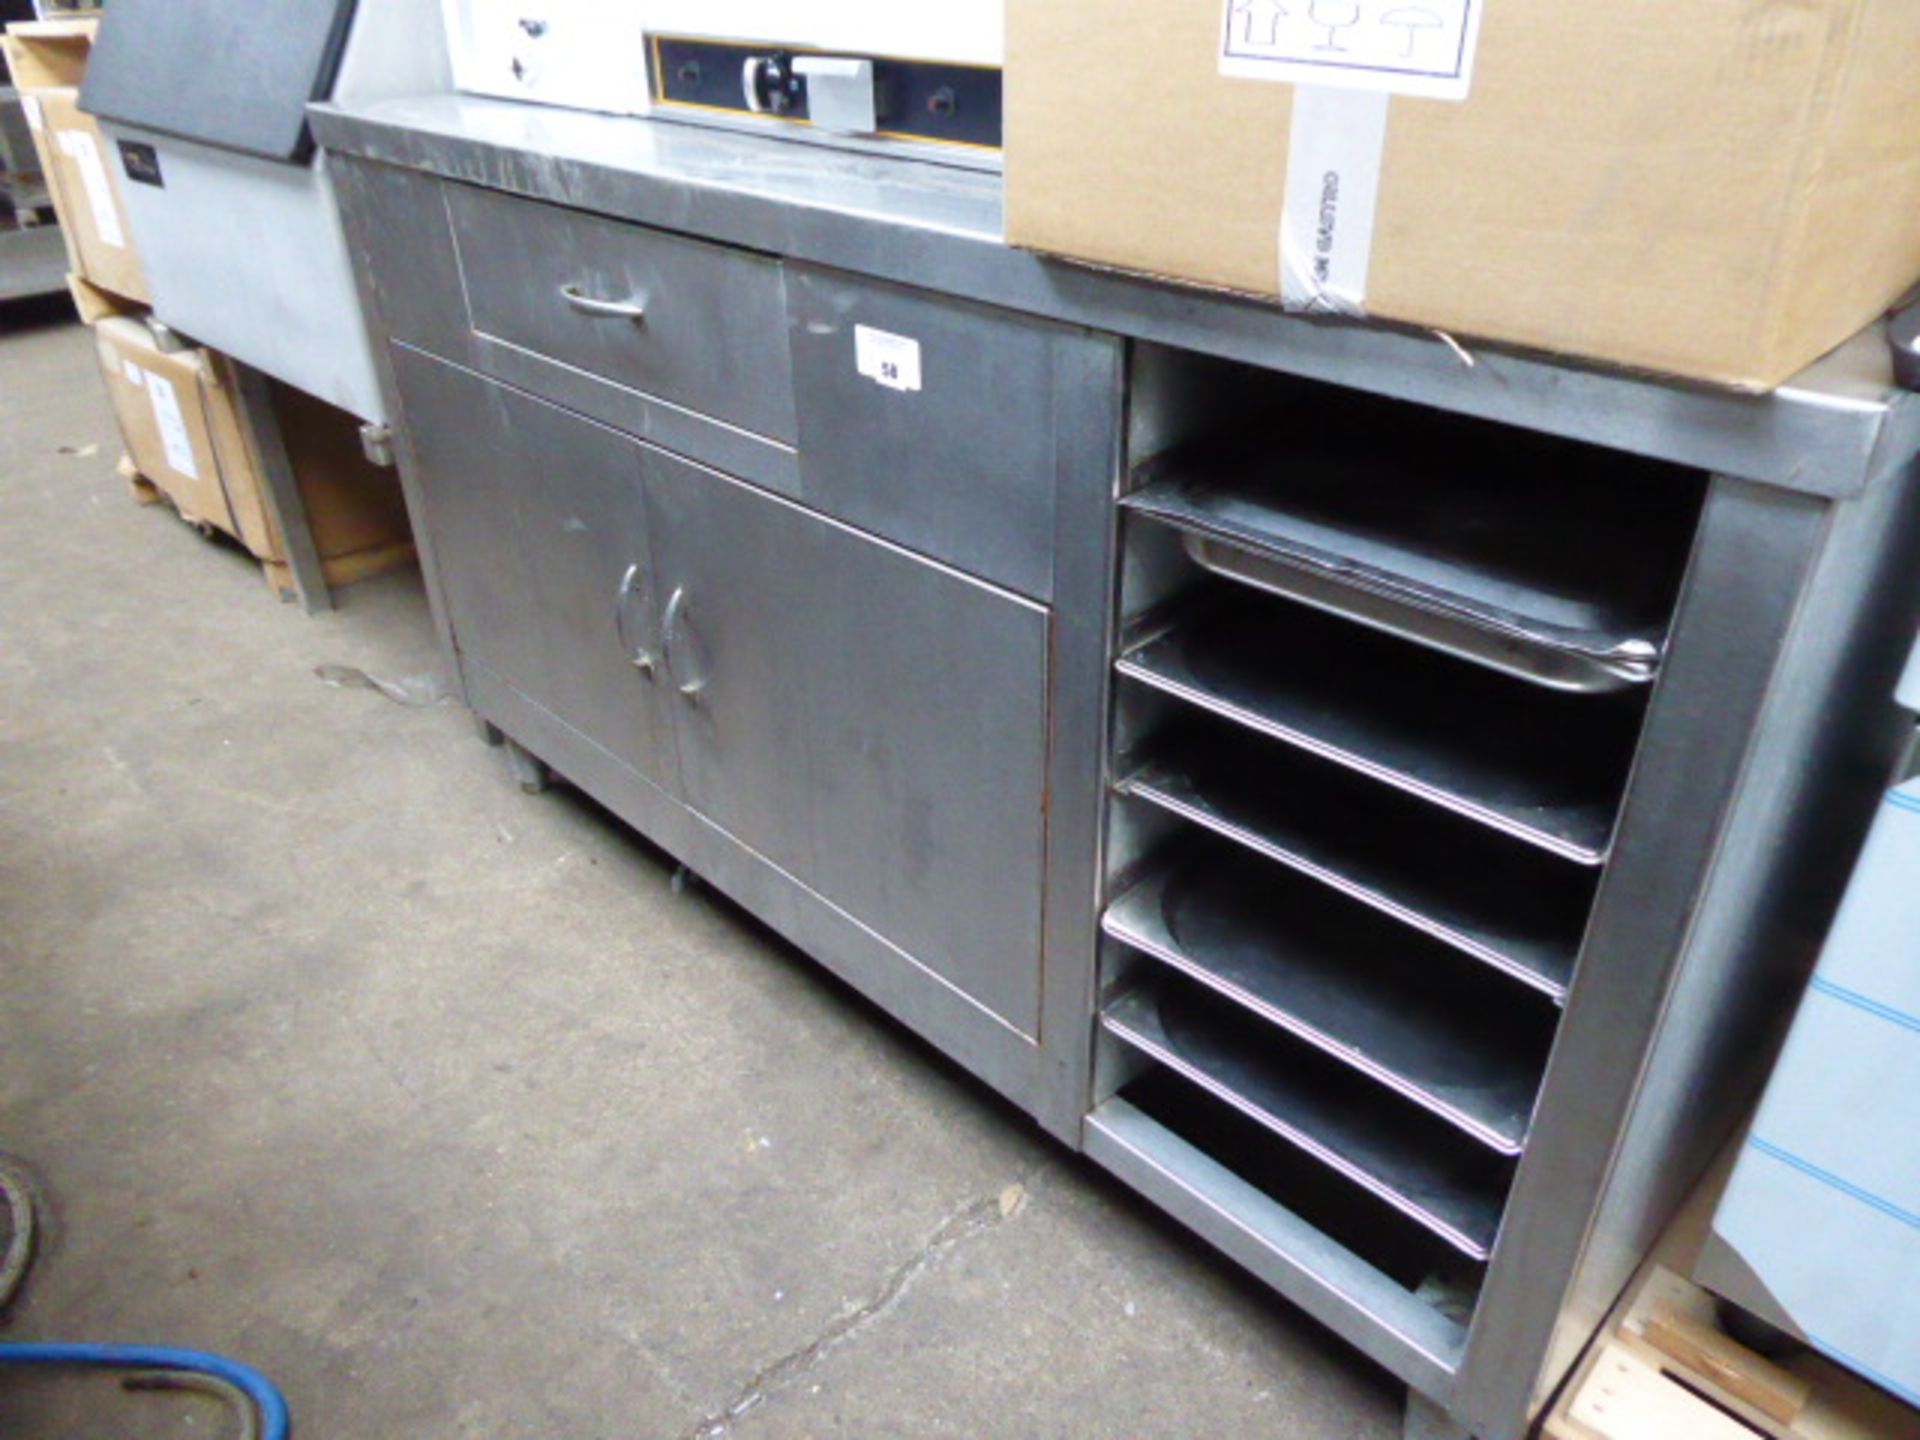 150cm stainless steel counter with drawer, 2 cupboards and space for trays under